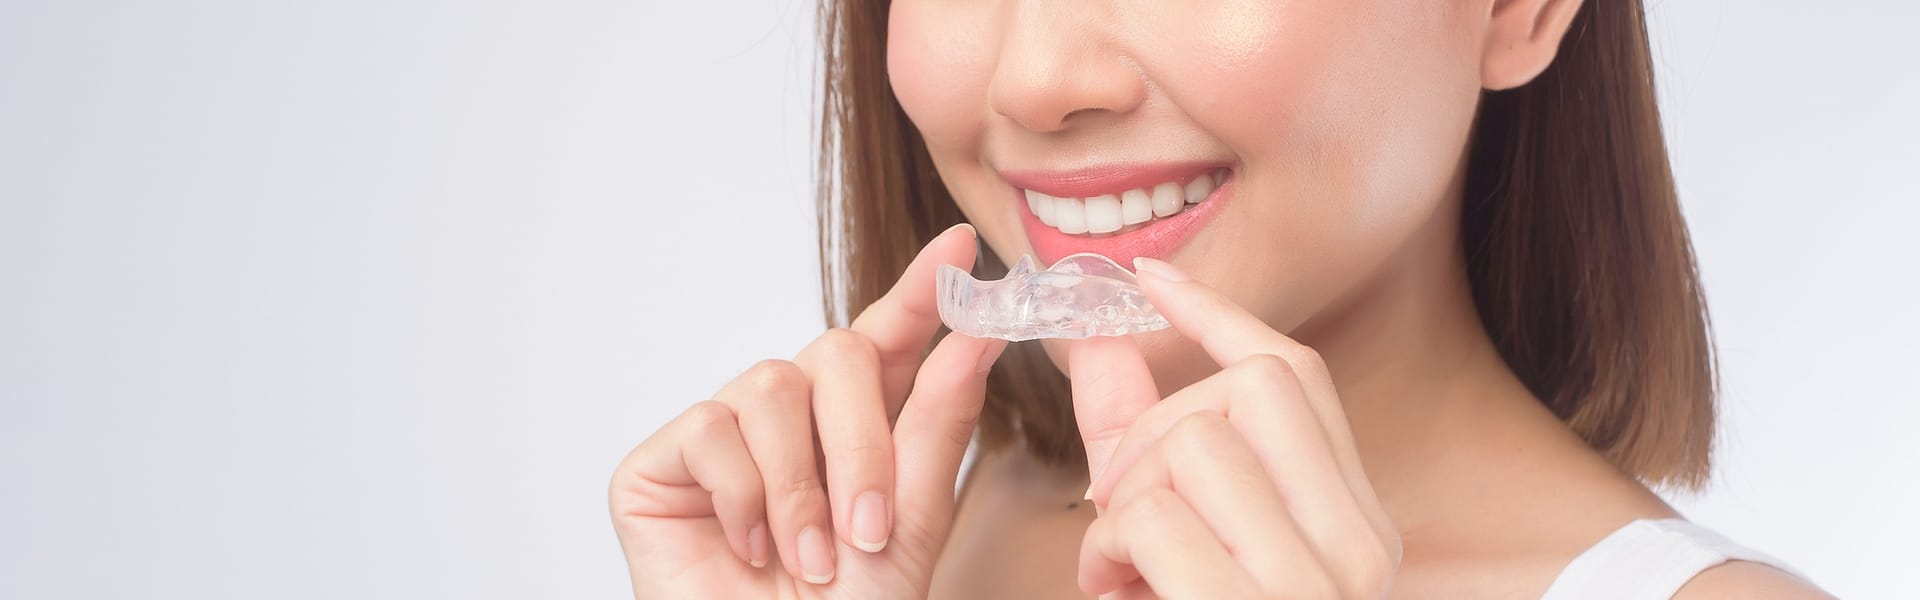 The Benefits of Invisalign: Straighten Your Teeth Discreetly